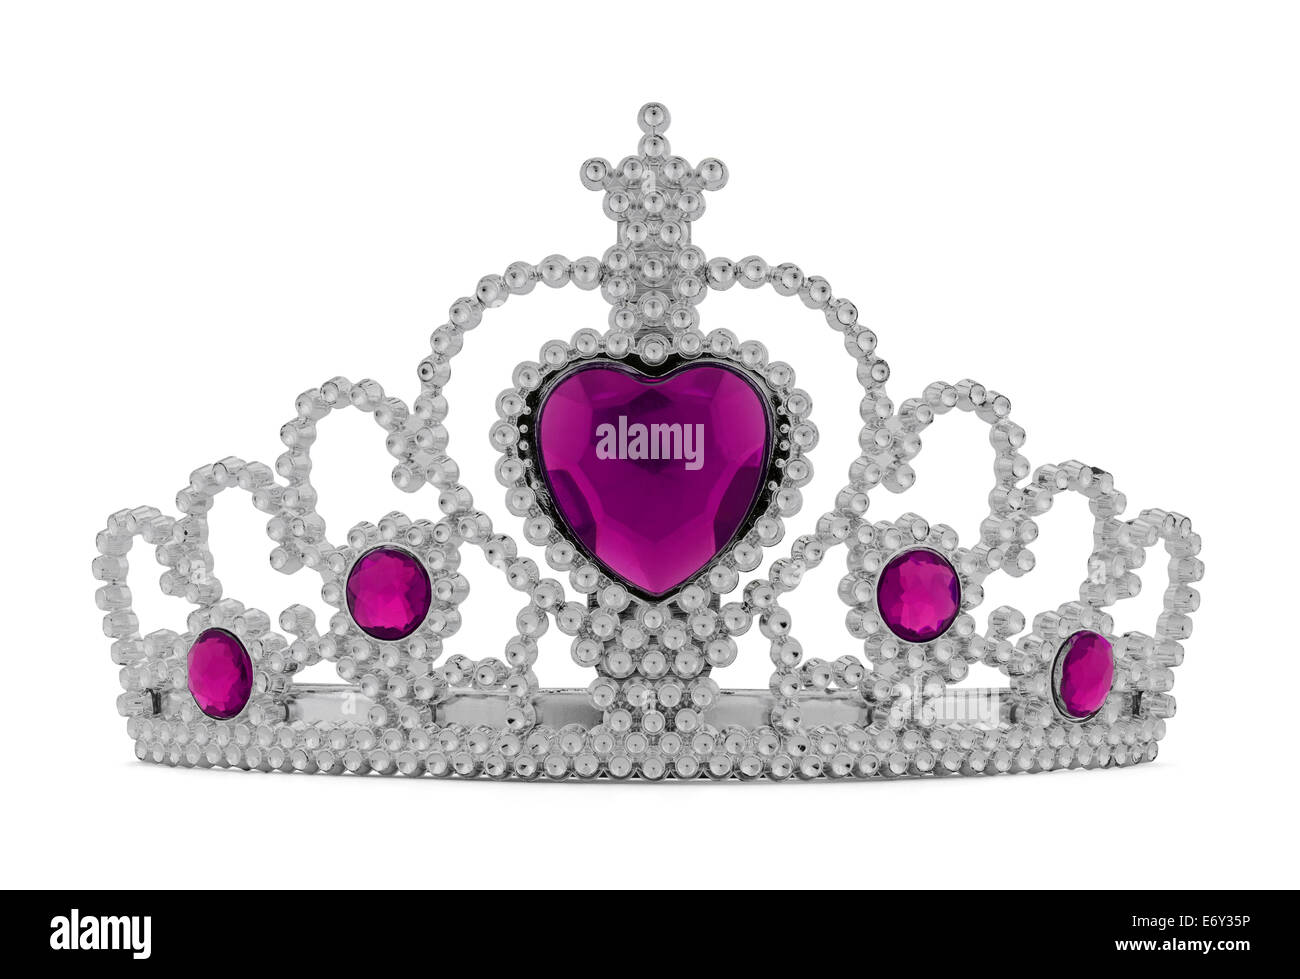 Girls Silver Tiara Crown with Pink Heart Isolated on White Background. Stock Photo